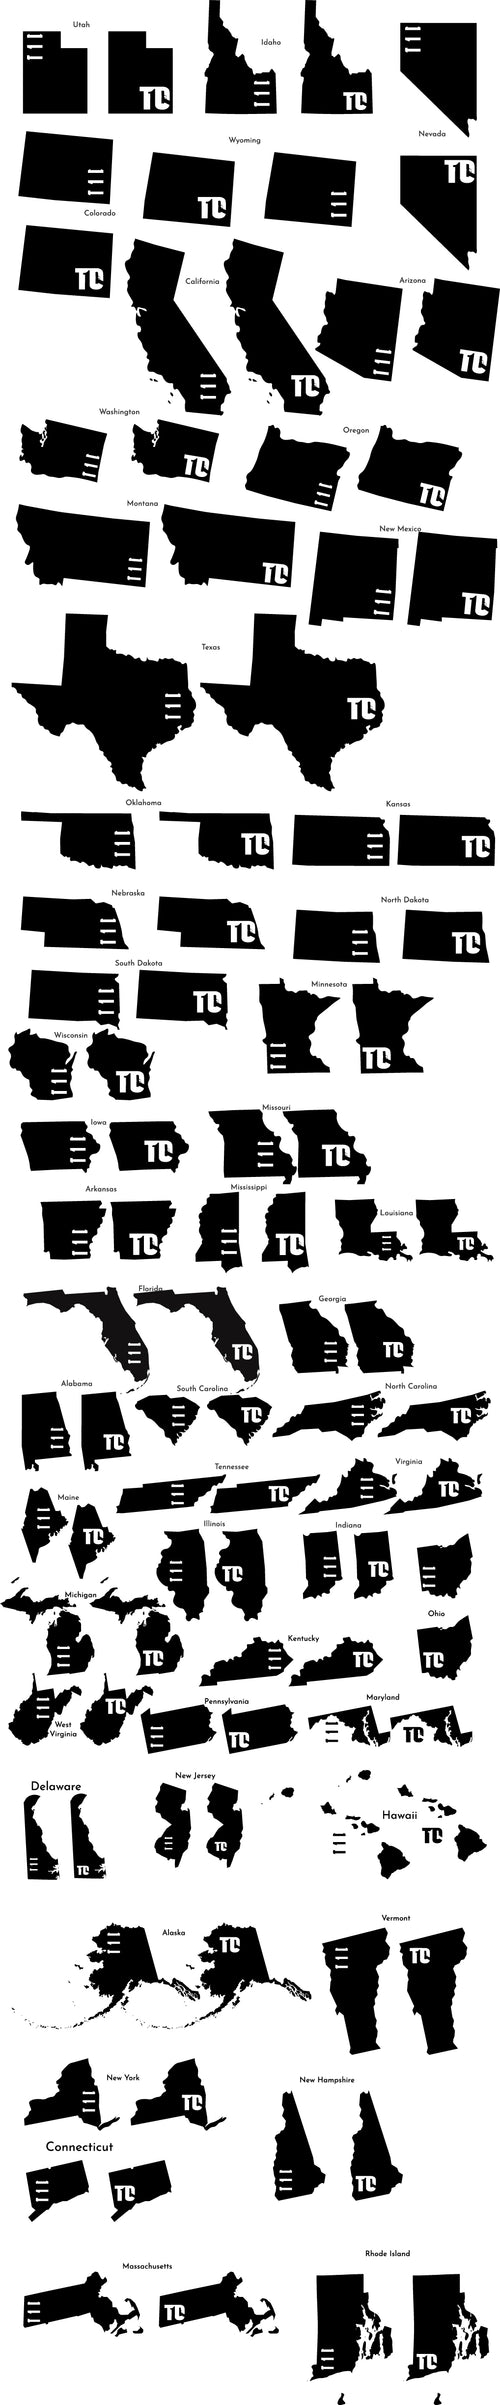 T1C - THE STATES - T-SHIRT